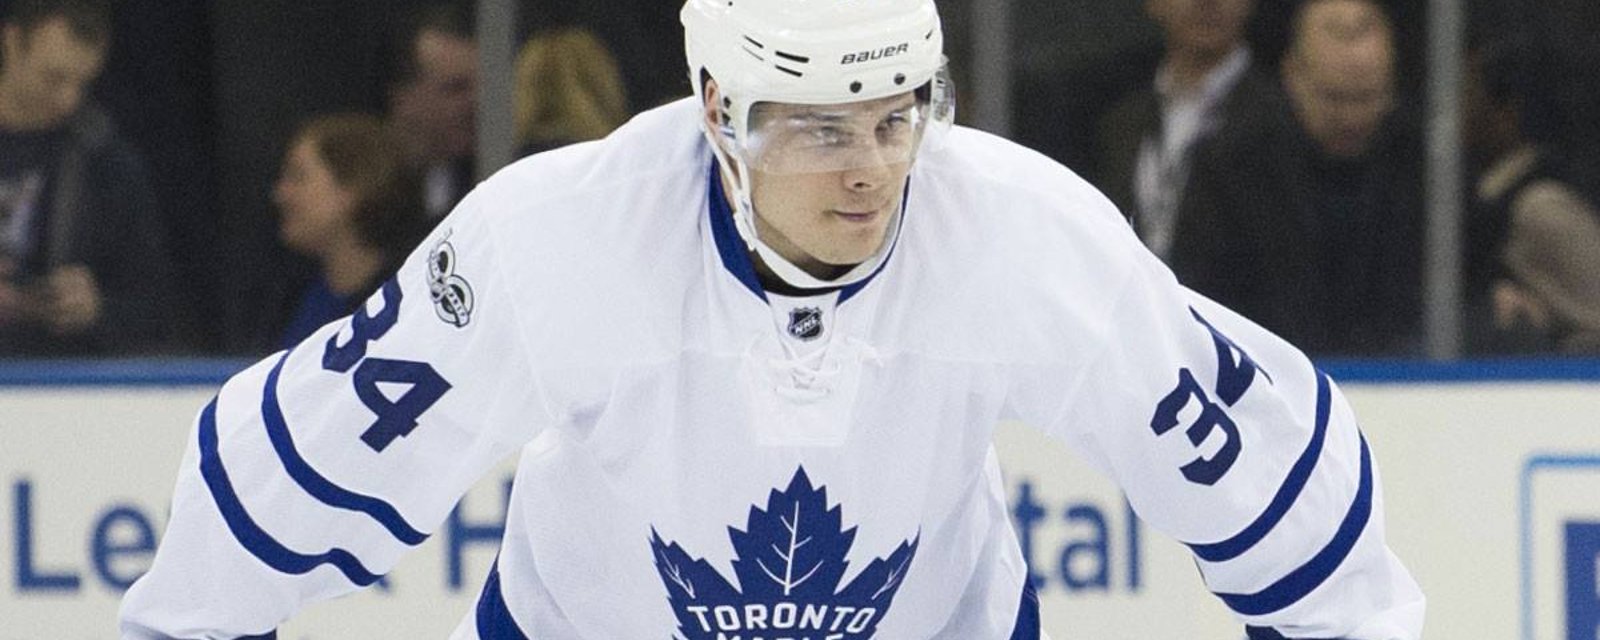 Report: Does Matthews have a concussion?